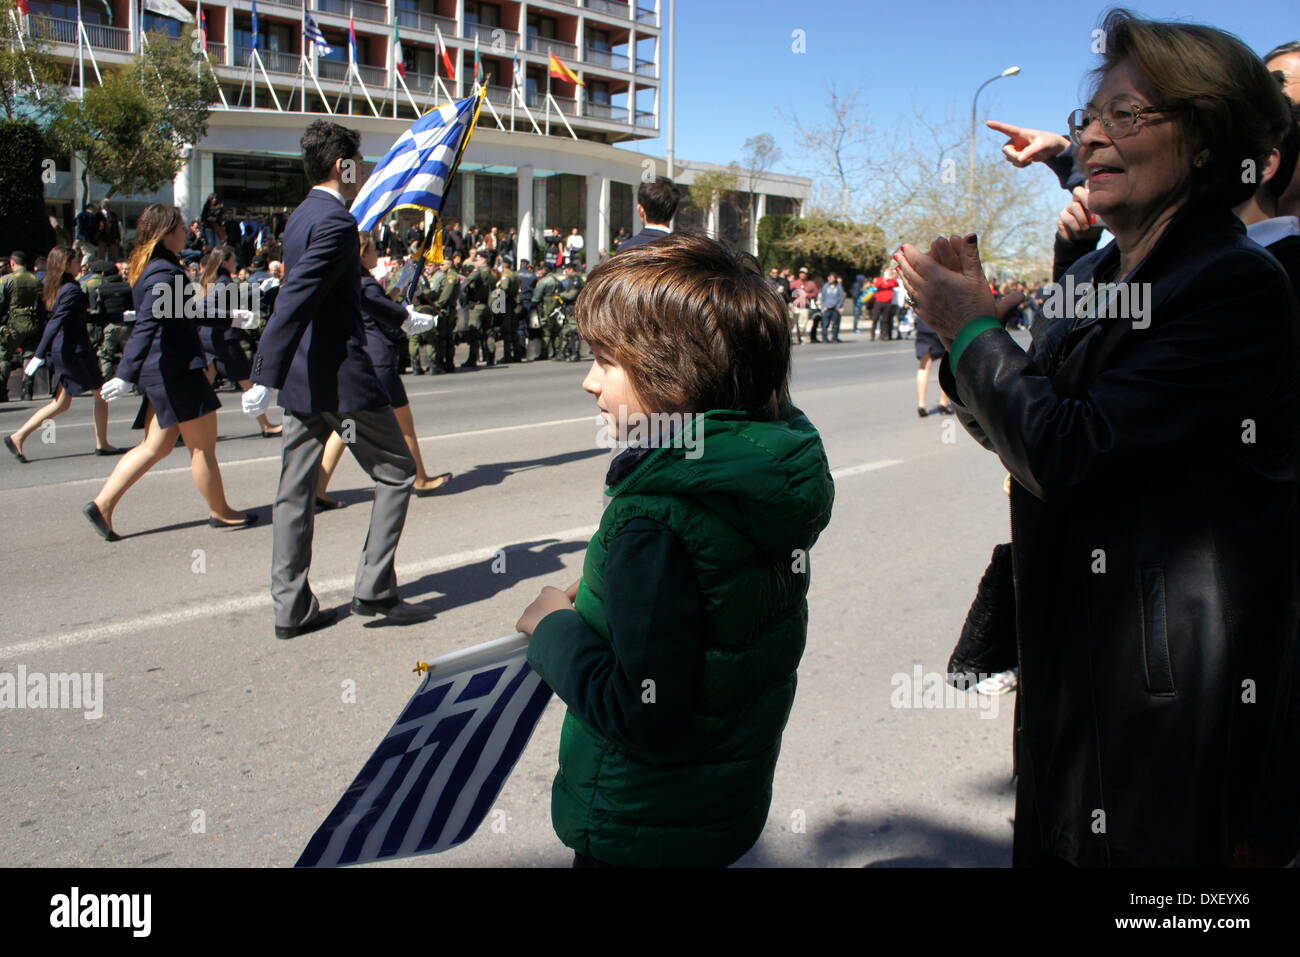 Thessaloniki, Greece. 25th March 2014. Greeks celebrated their national independence day amid tight security and protest in the northern port city of Thessaloniki, as school teachers staged a protest against planned layoffs as part of governments cost cutting reforms.  Credit:  Orhan Tsolak/Alamy Live News Stock Photo